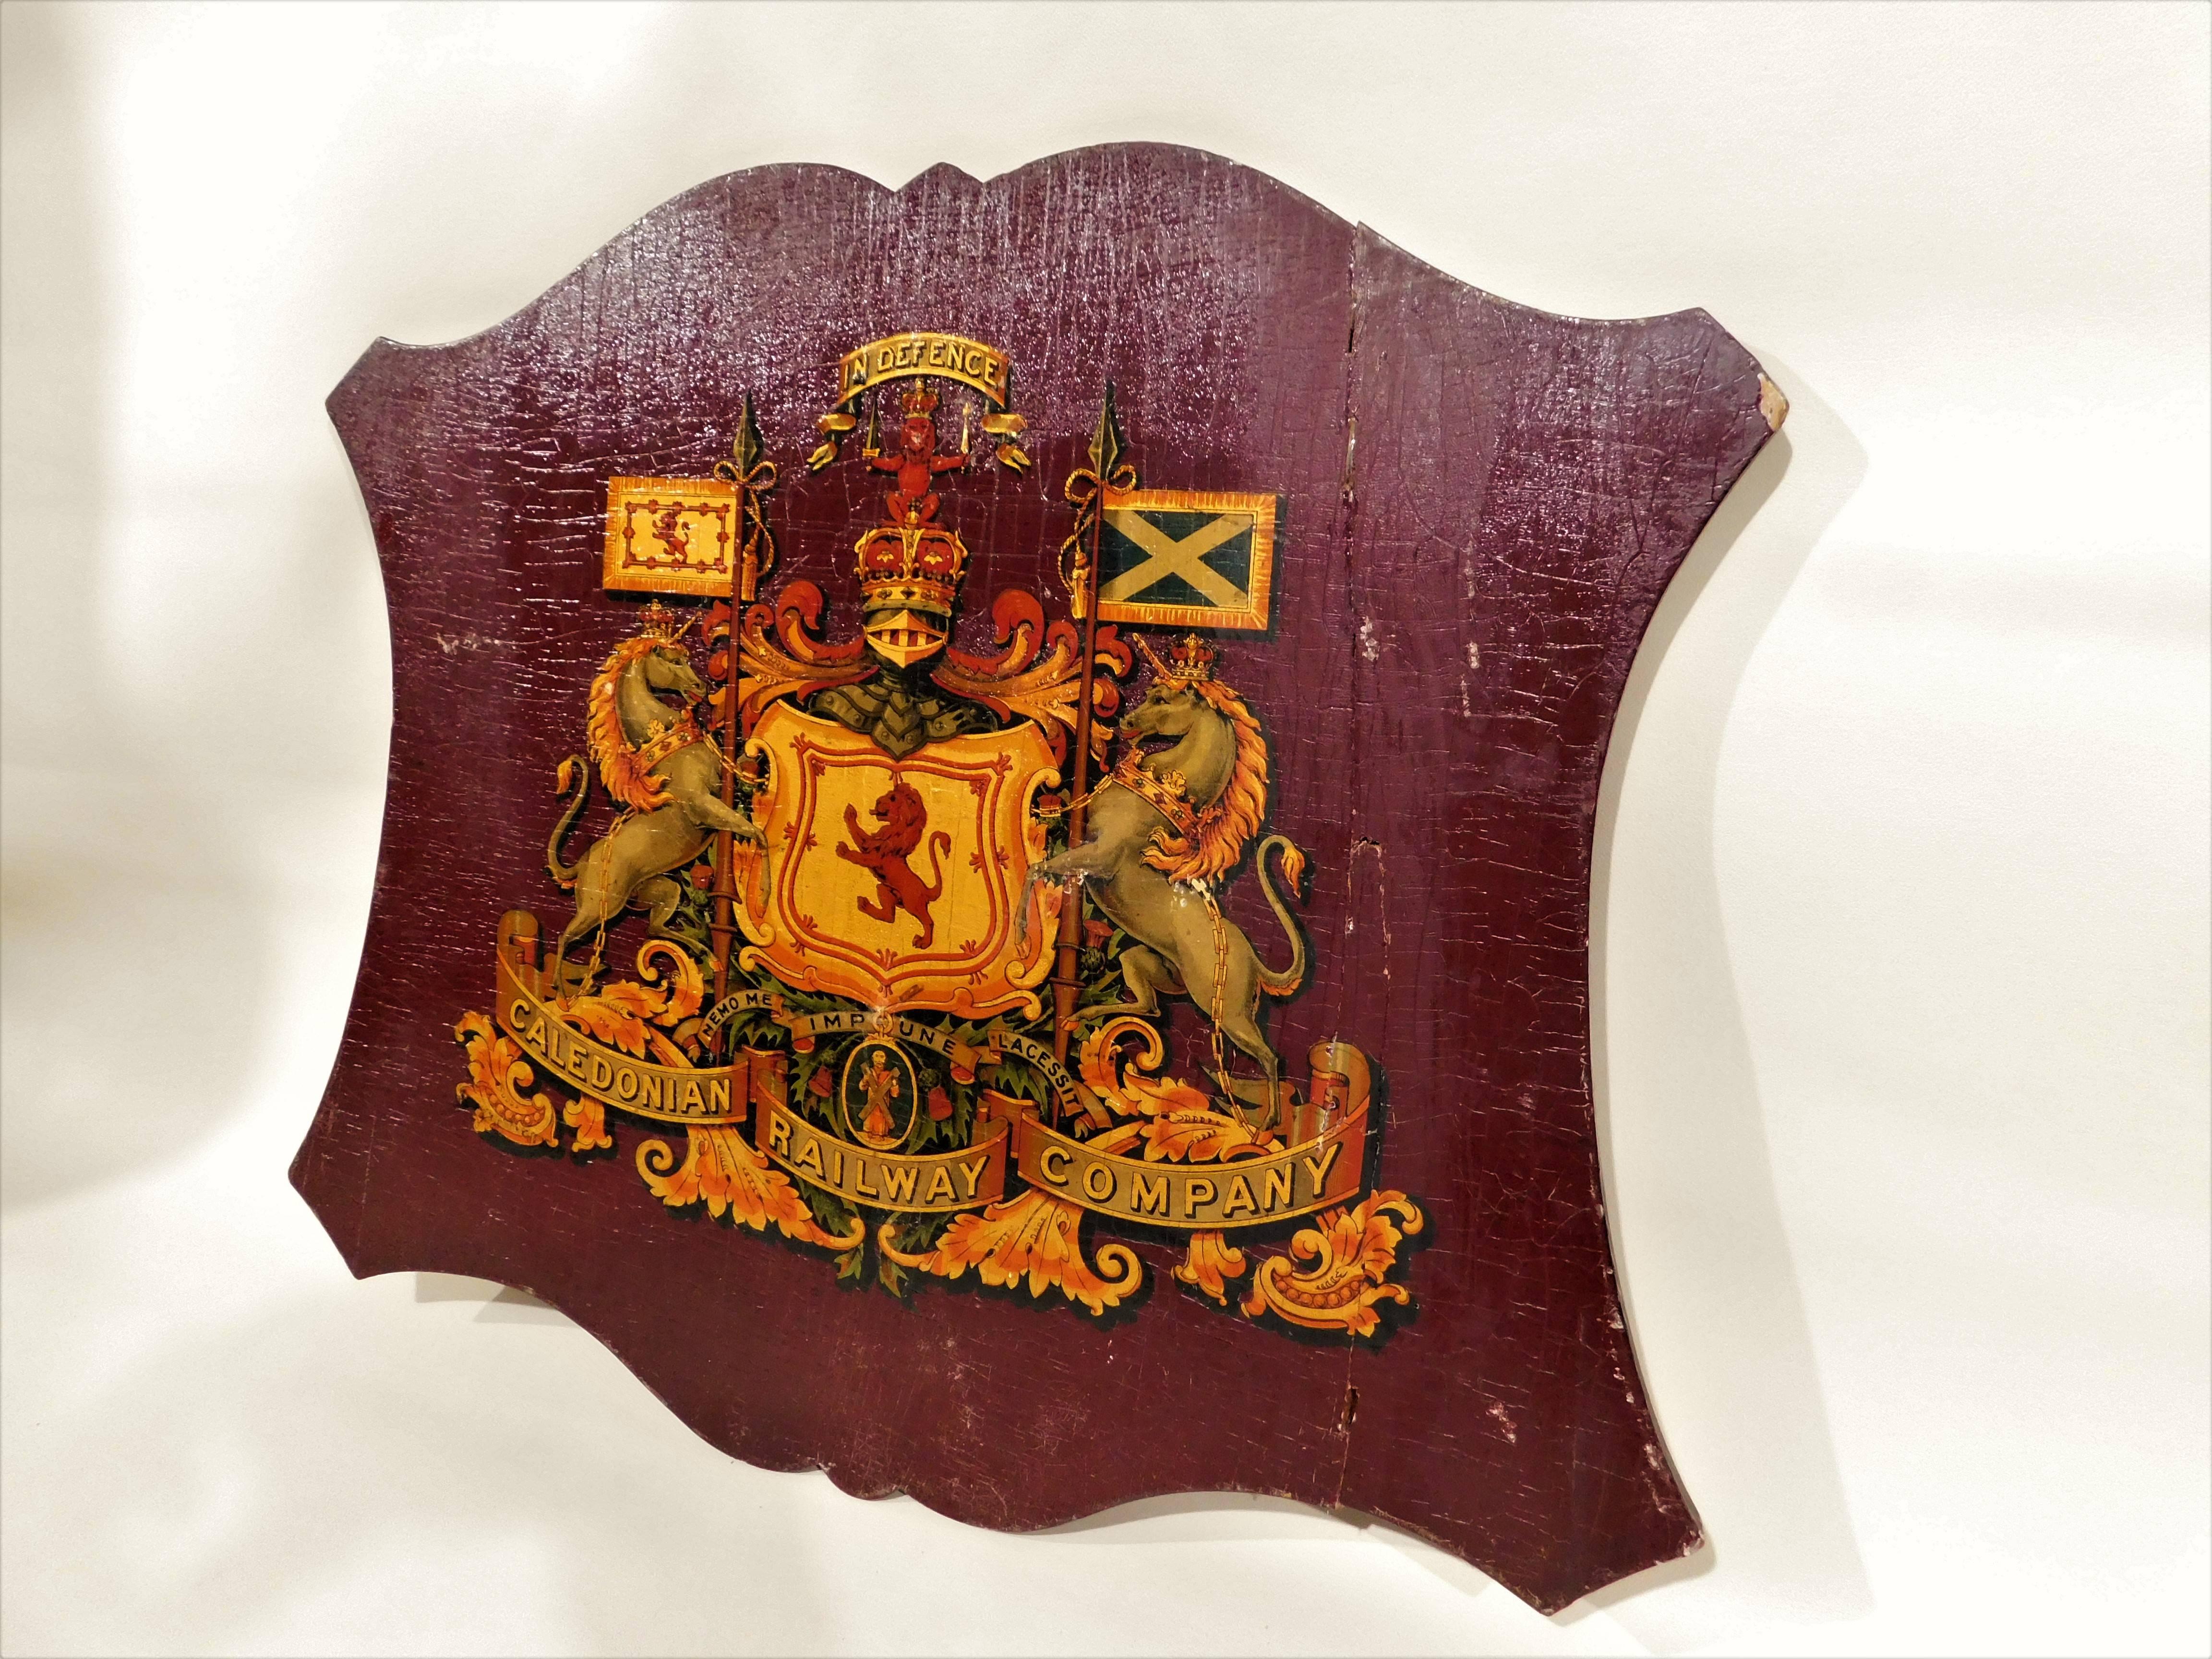 Caledonian Railway Company Coat of Arms mounted on a shield shaped wooden backing board. Scottish railroad train sign measures 20